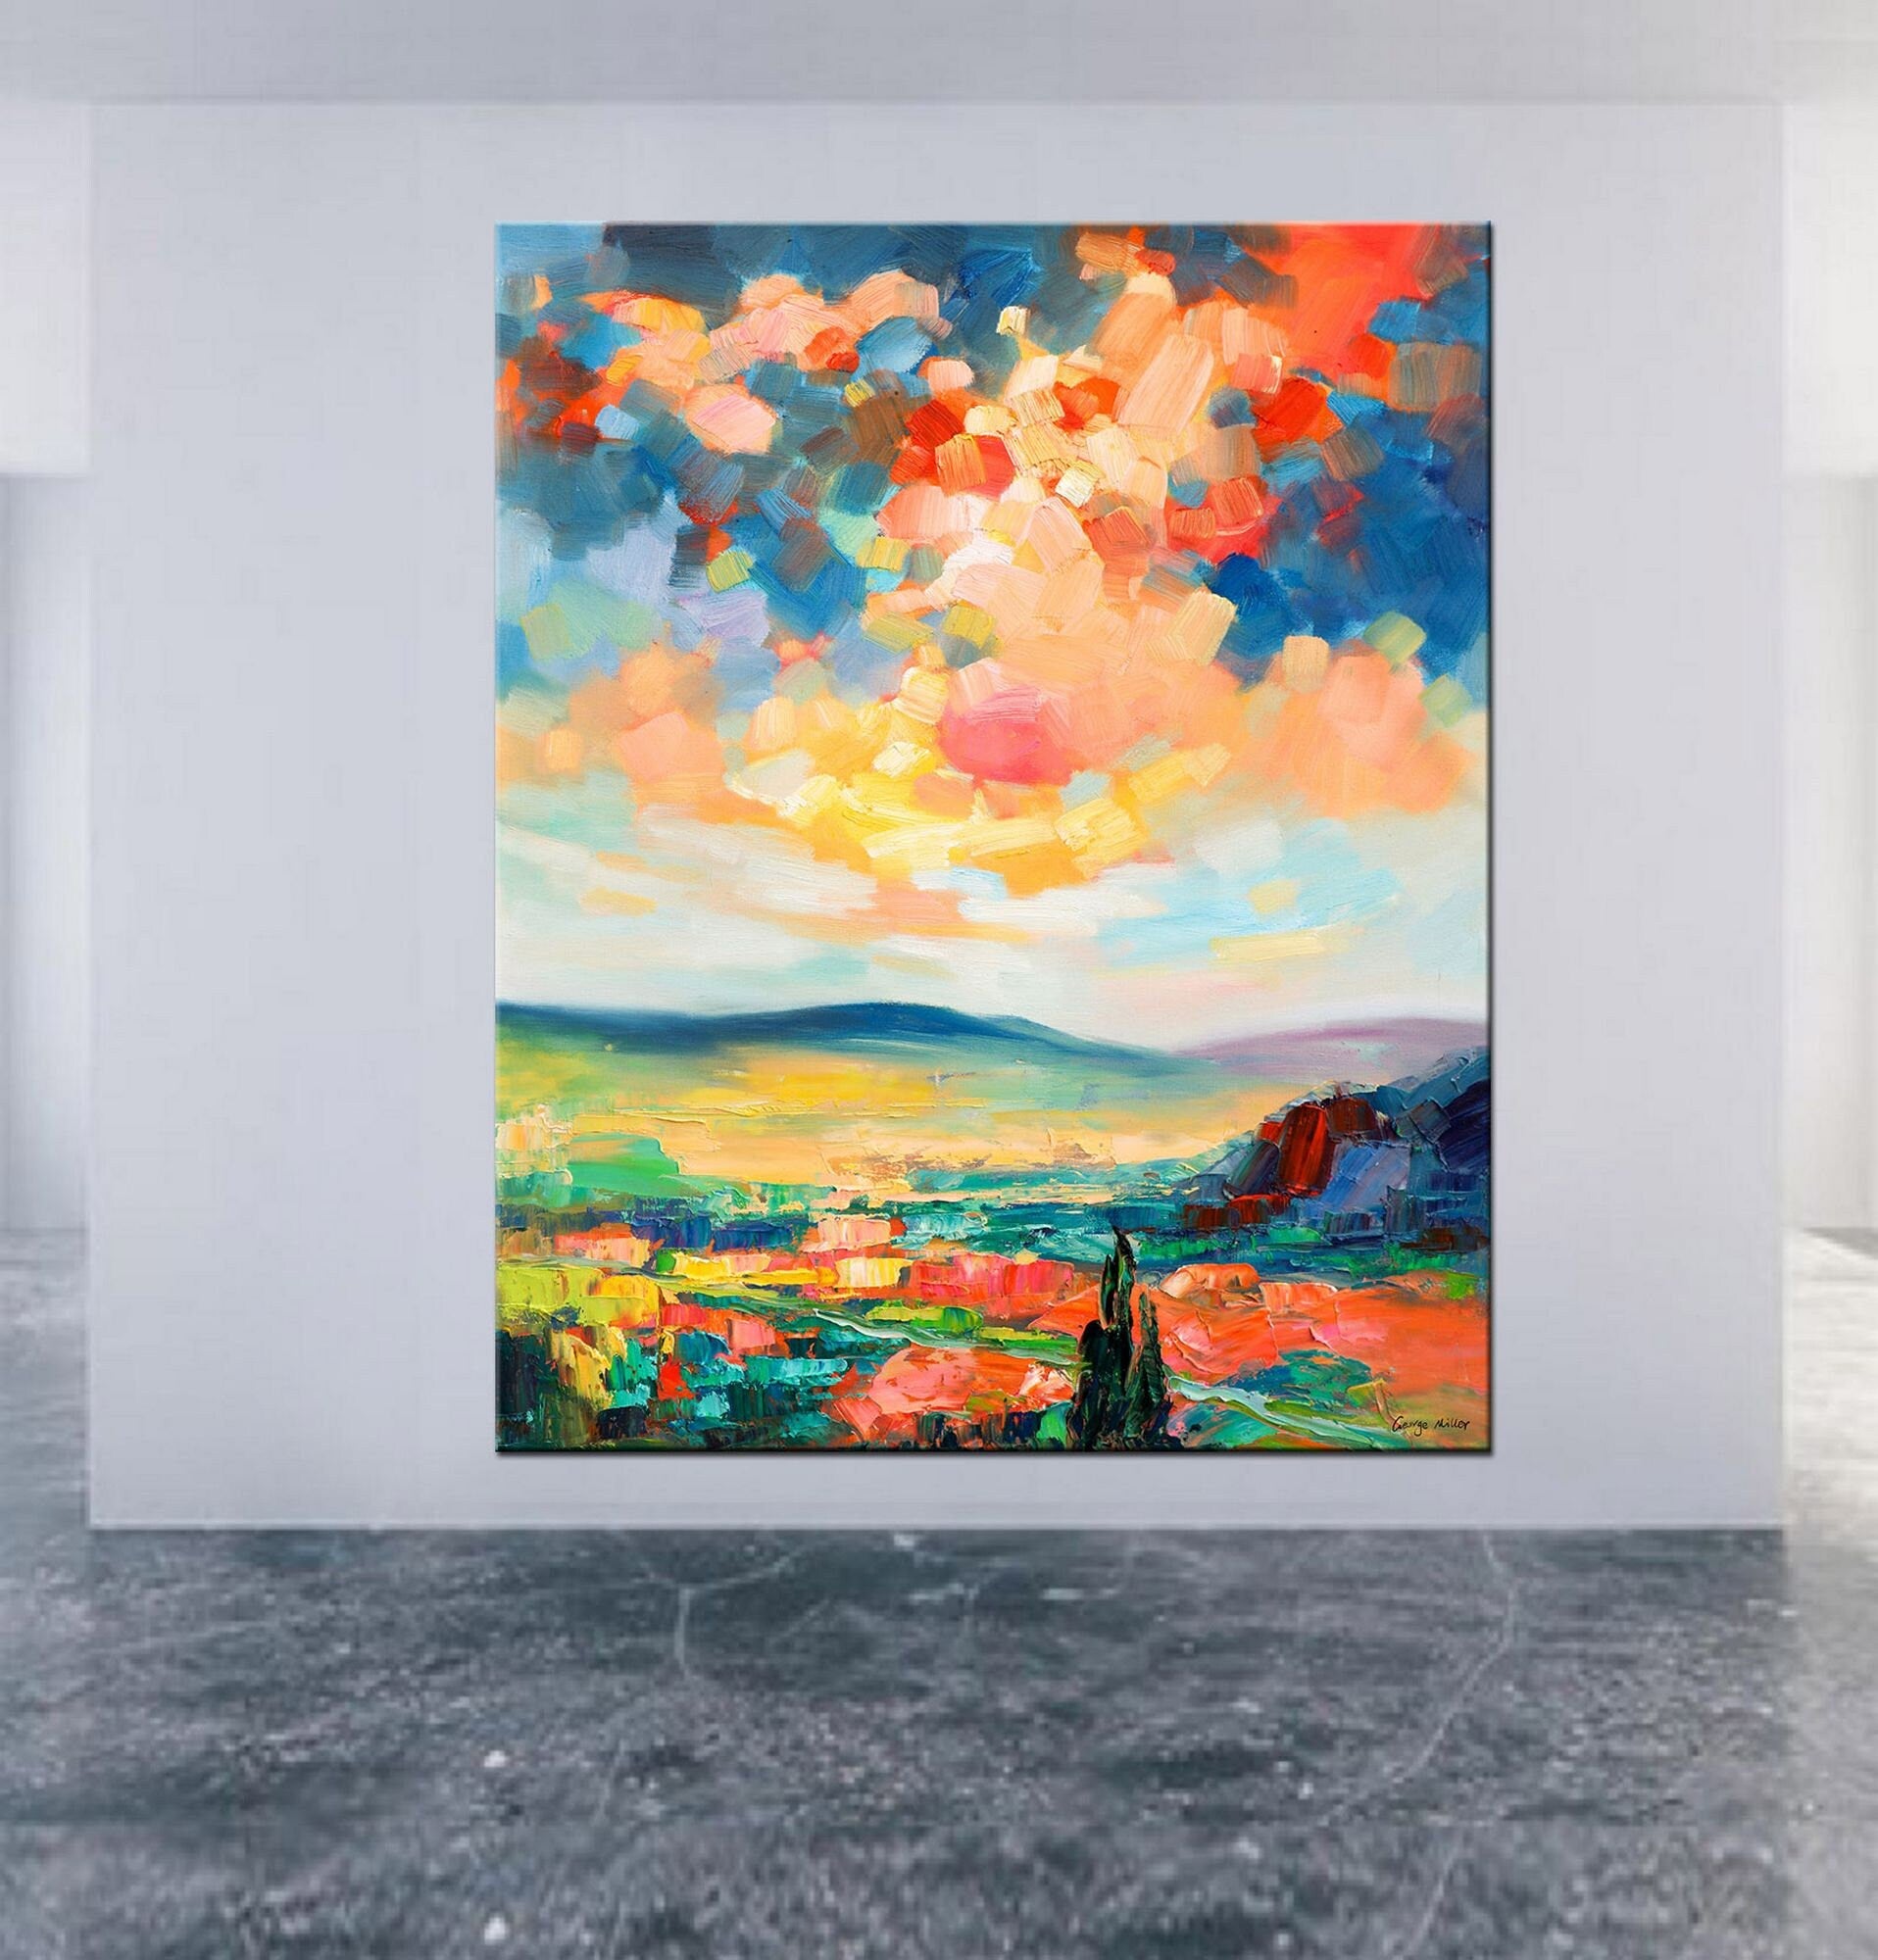 Large Painting Landscape, Skyscape, Canvas Painting, Oil Painting Abstract, Modern Art, Original Abstract Art, Large Landscape Painting